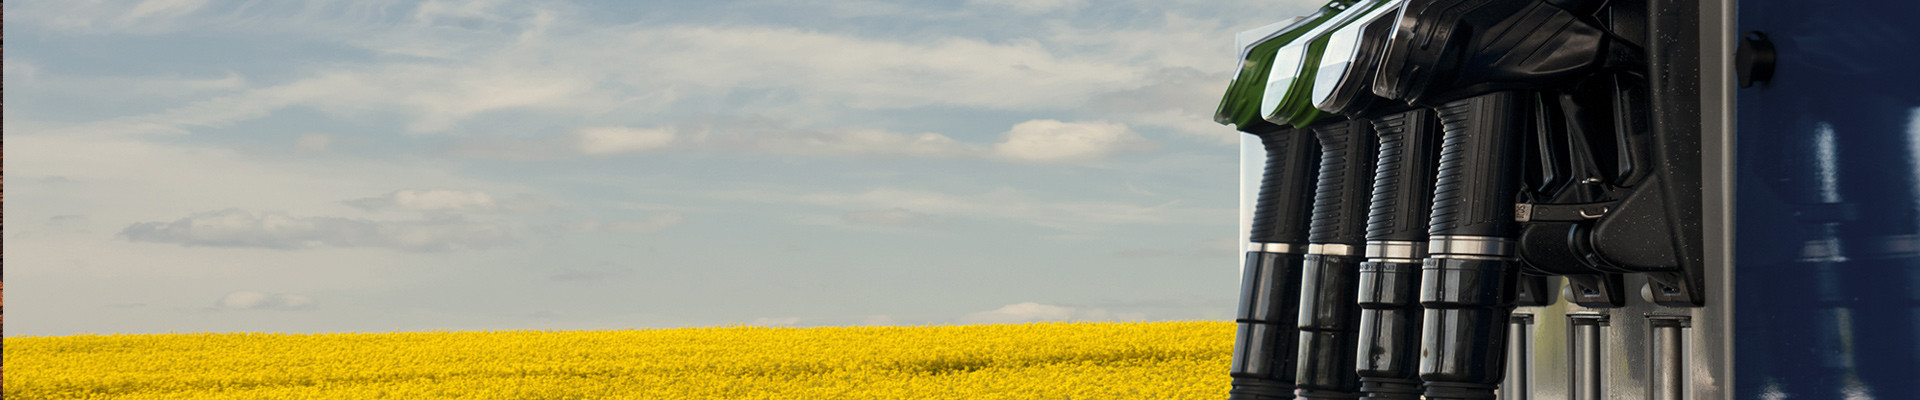 Biodiesel and rapeseed field